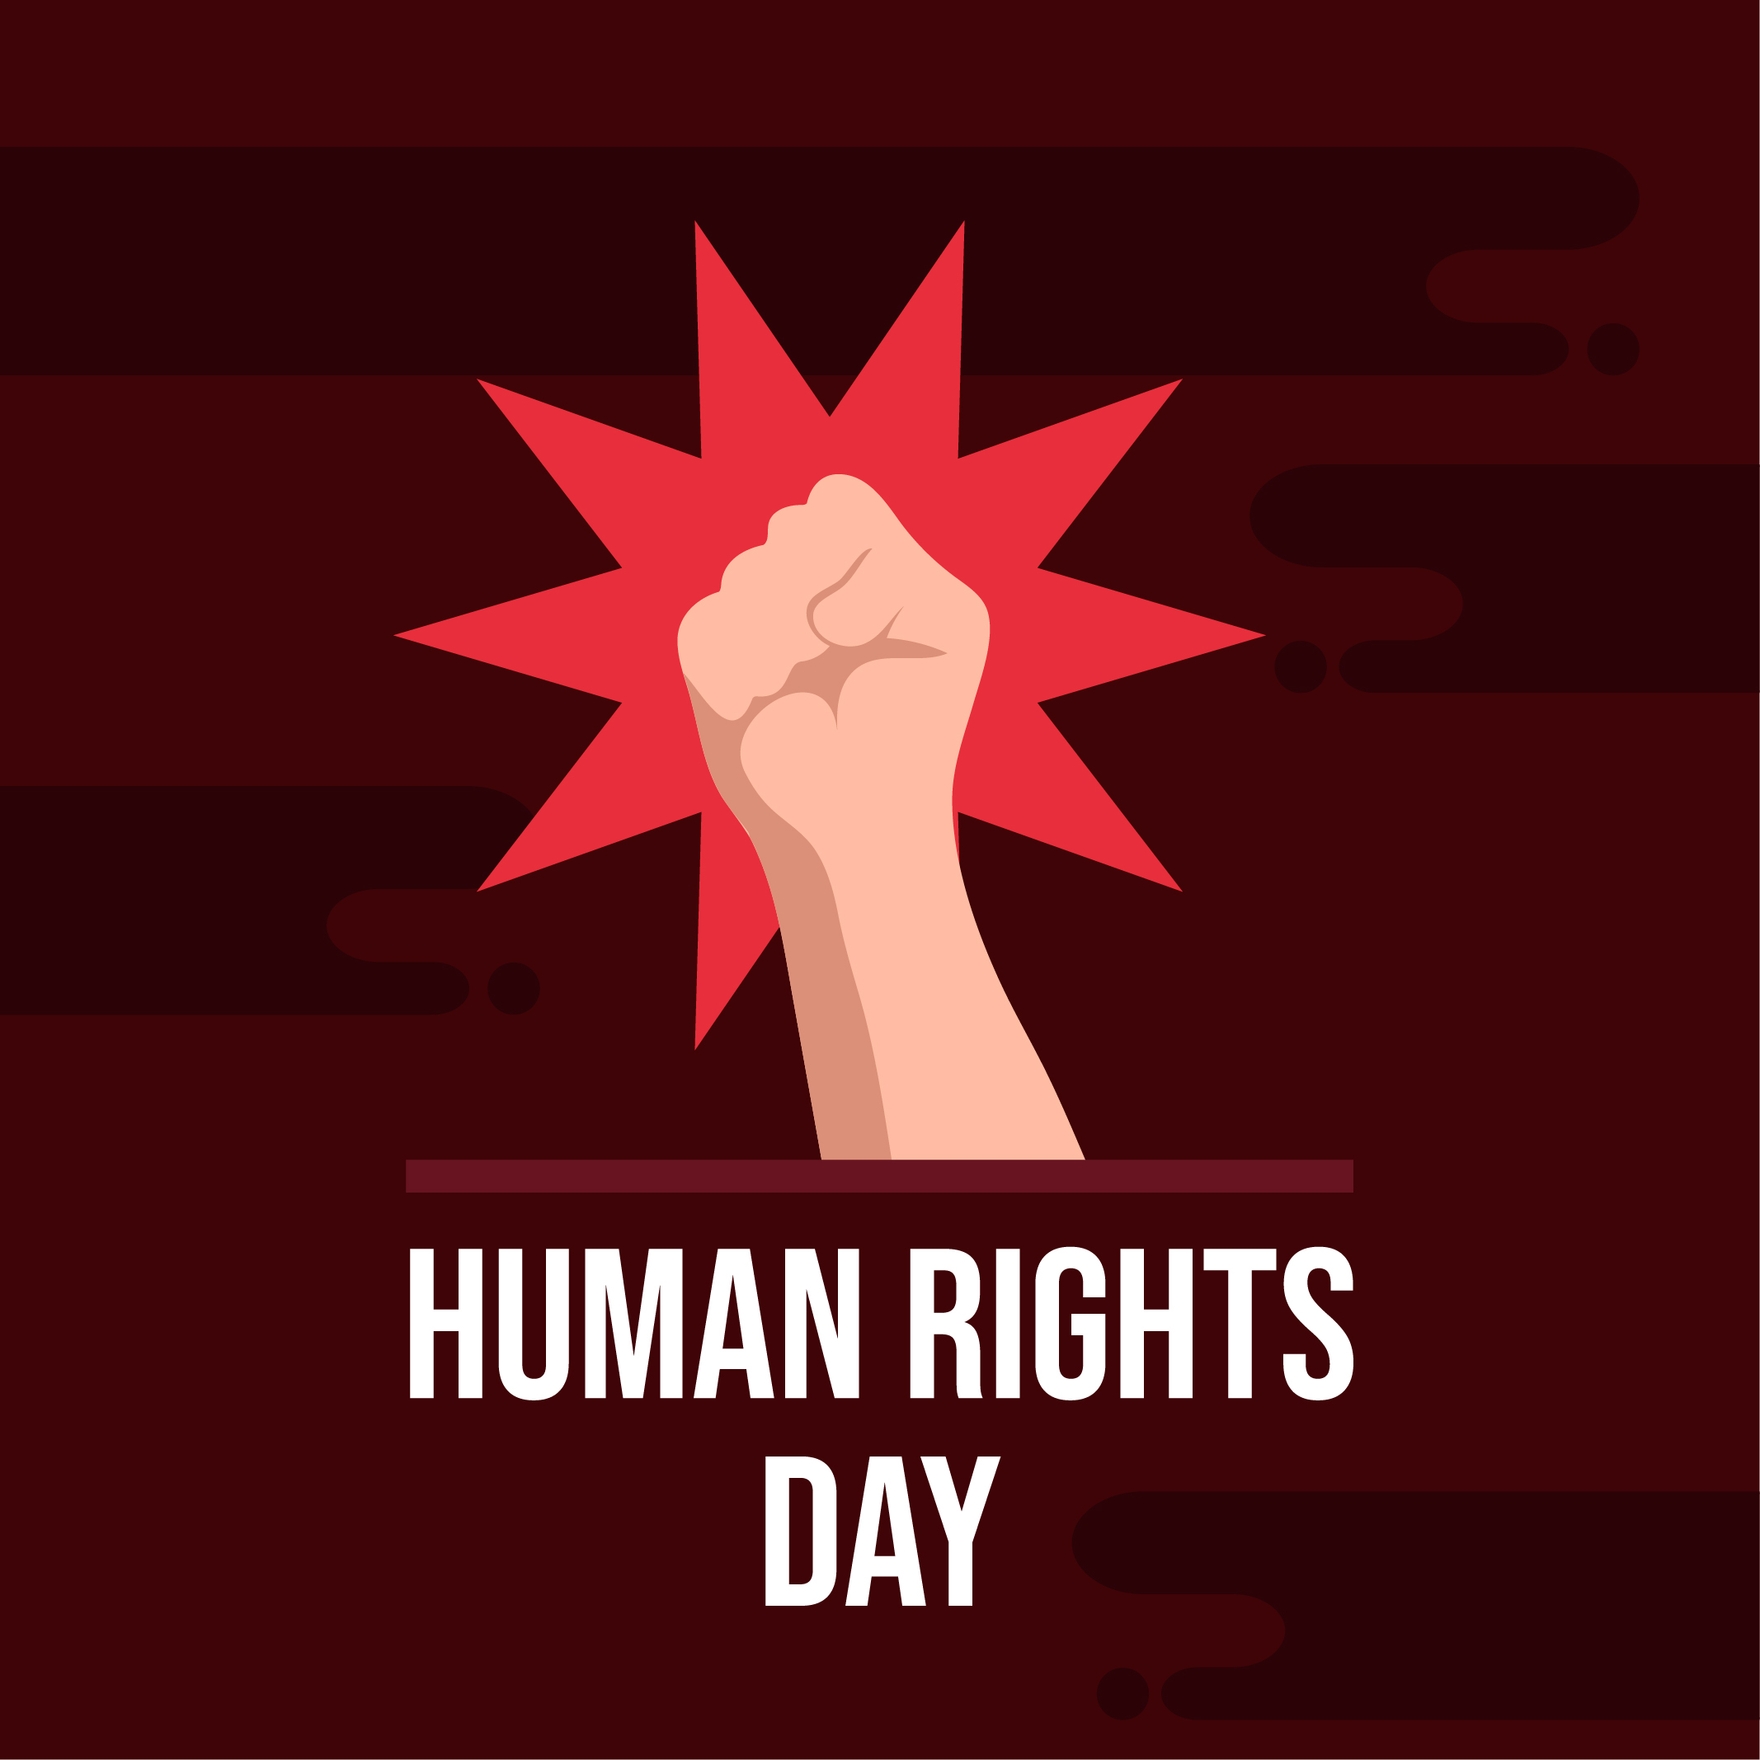 Human Rights Day Vector in Illustrator, PSD, EPS, SVG, JPG, PNG